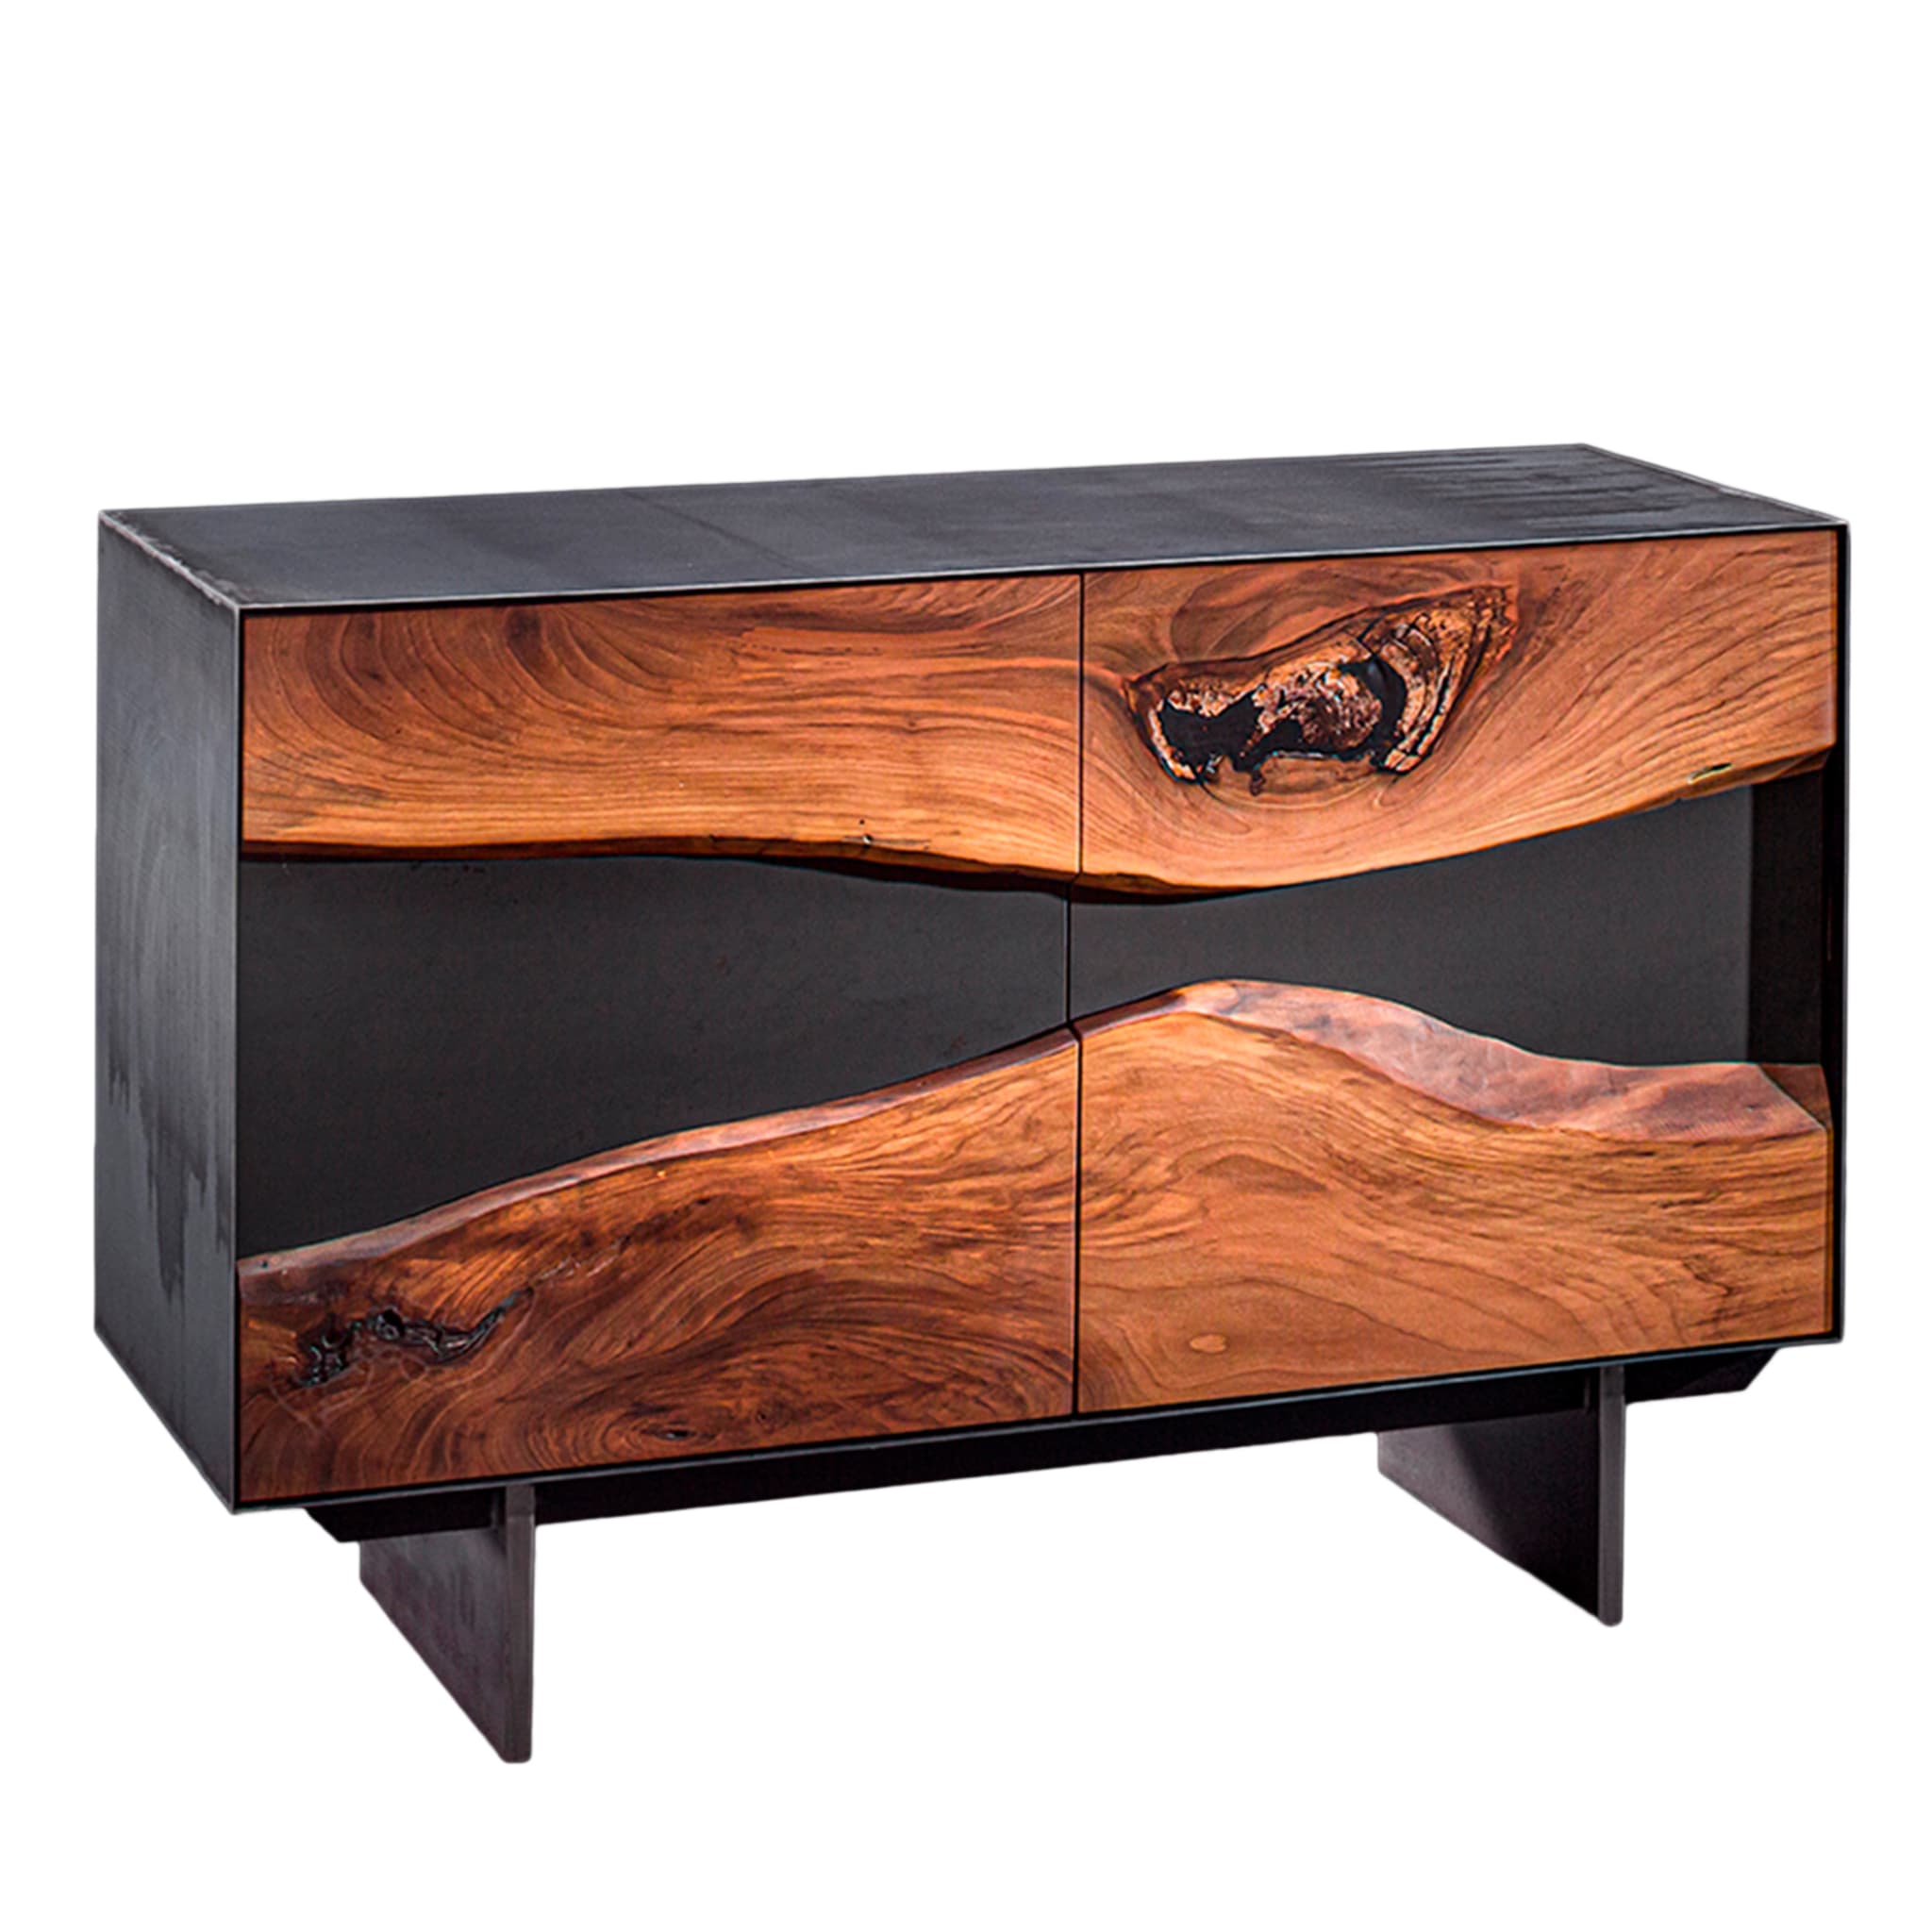 Walnut and steel sideboard #2 - Main view